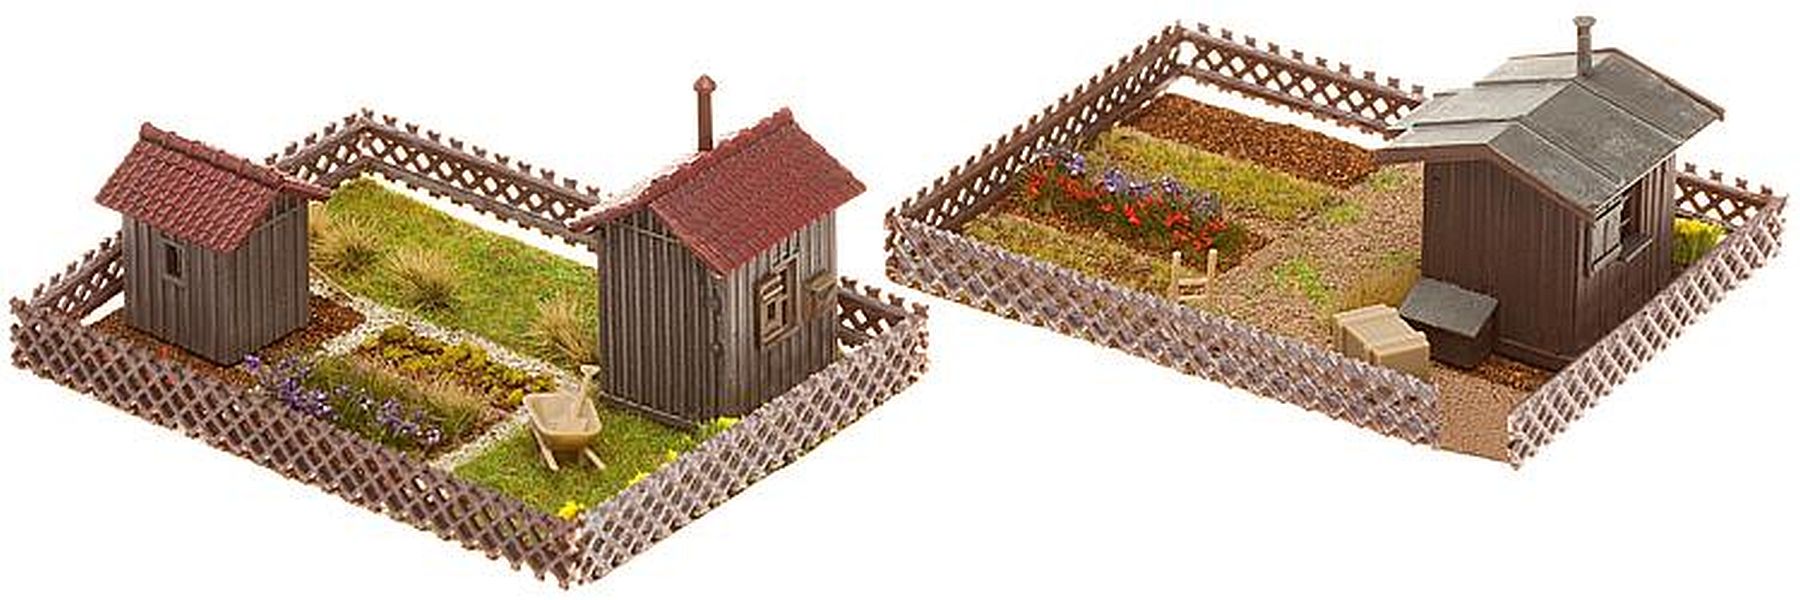 Faller 180494 H0 Allotments With Sheds Model Railway Accessories - SGS Model Store